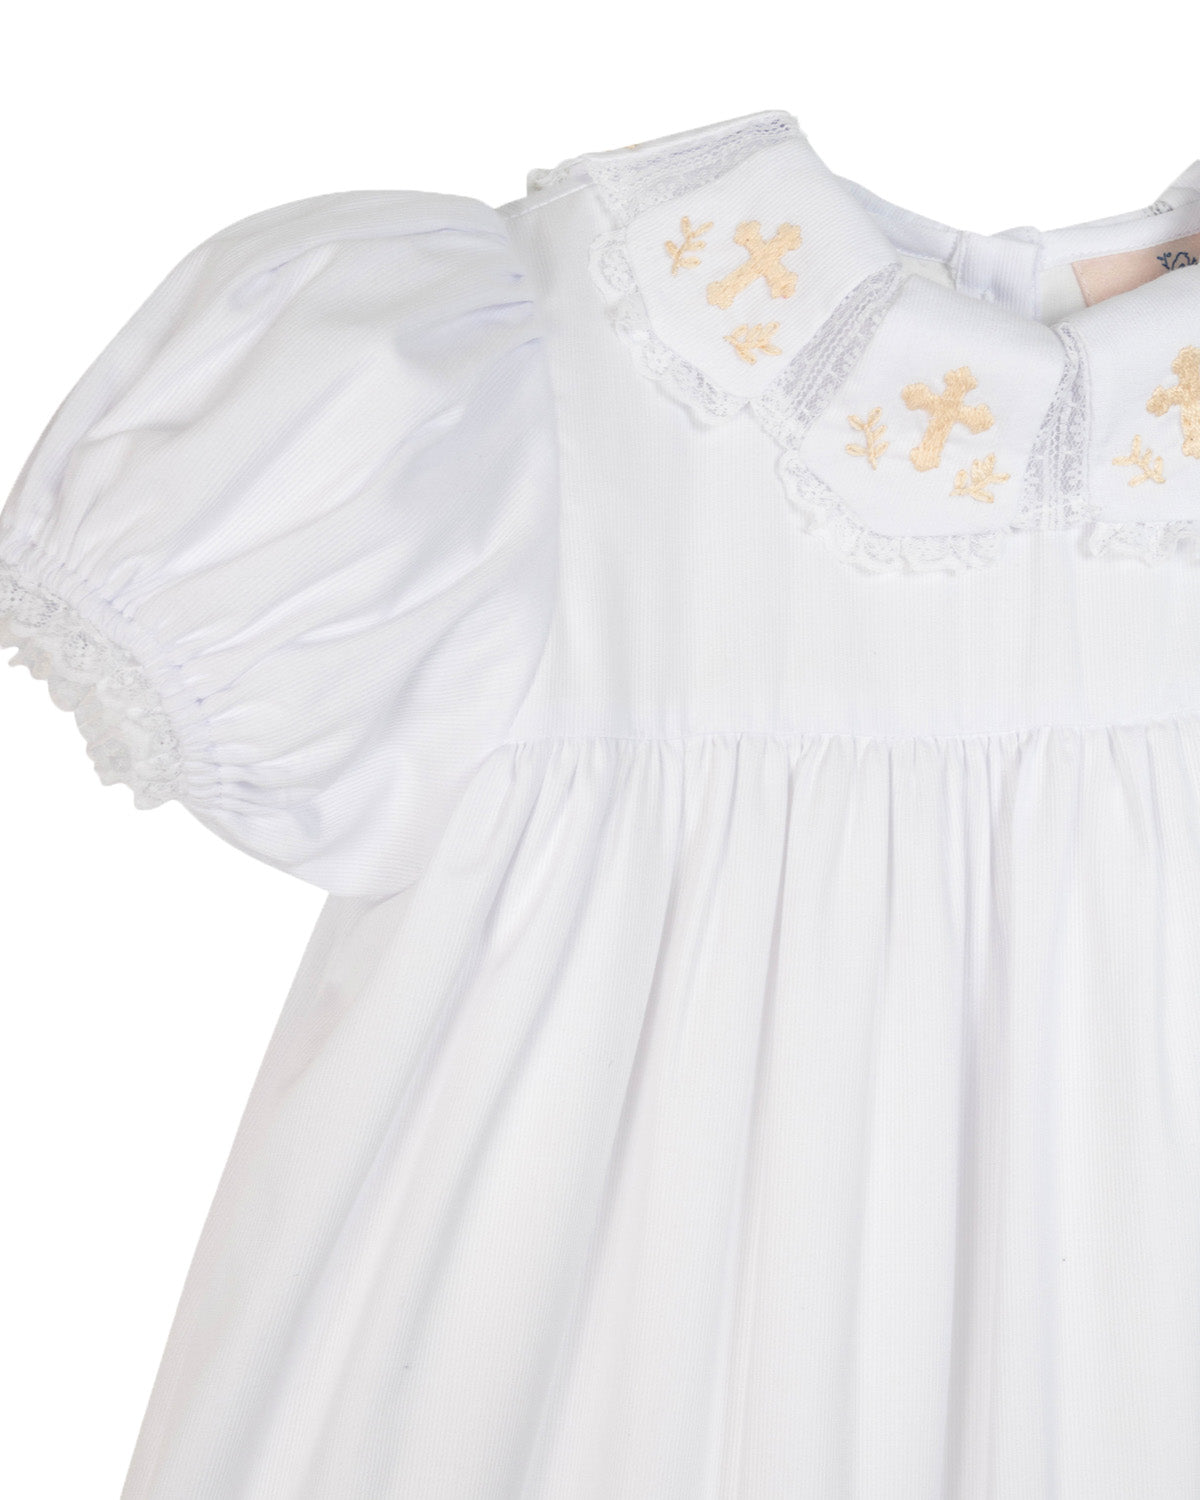 Cross Hand Embroidered Dress with Lace Collar